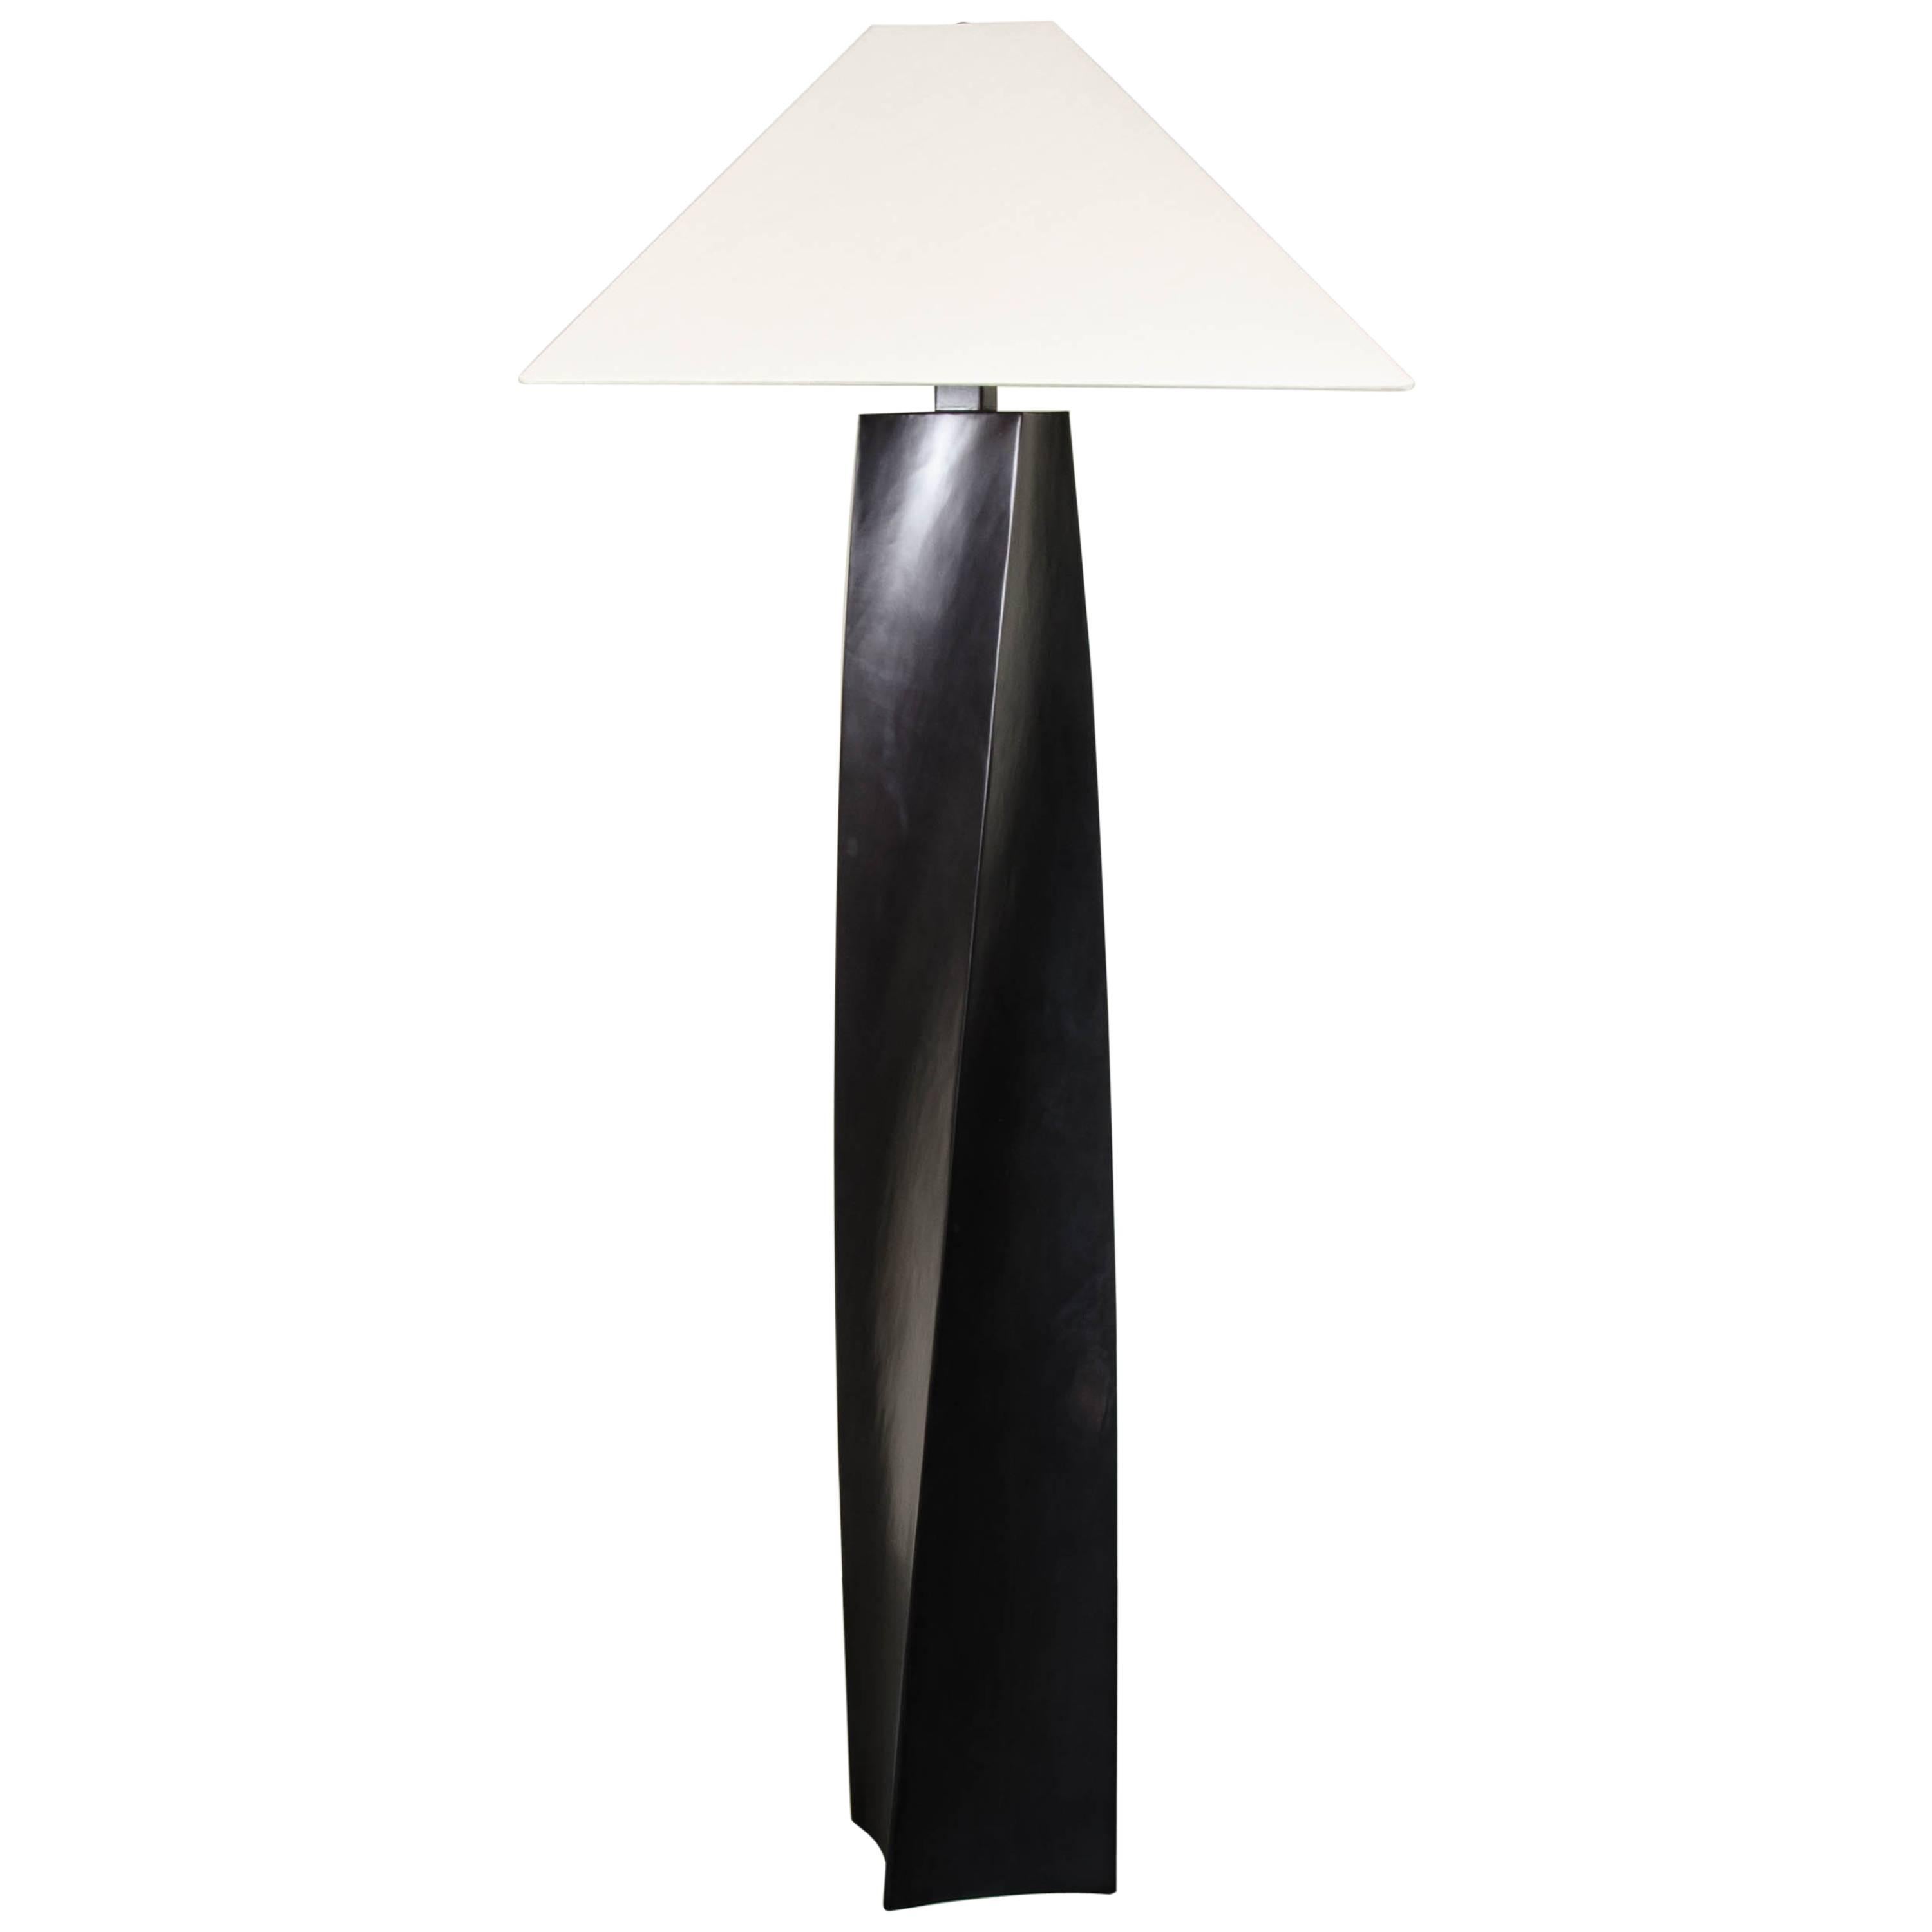 Helix Floor Lamp, Black Copper by Robert Kuo, Limited Edition